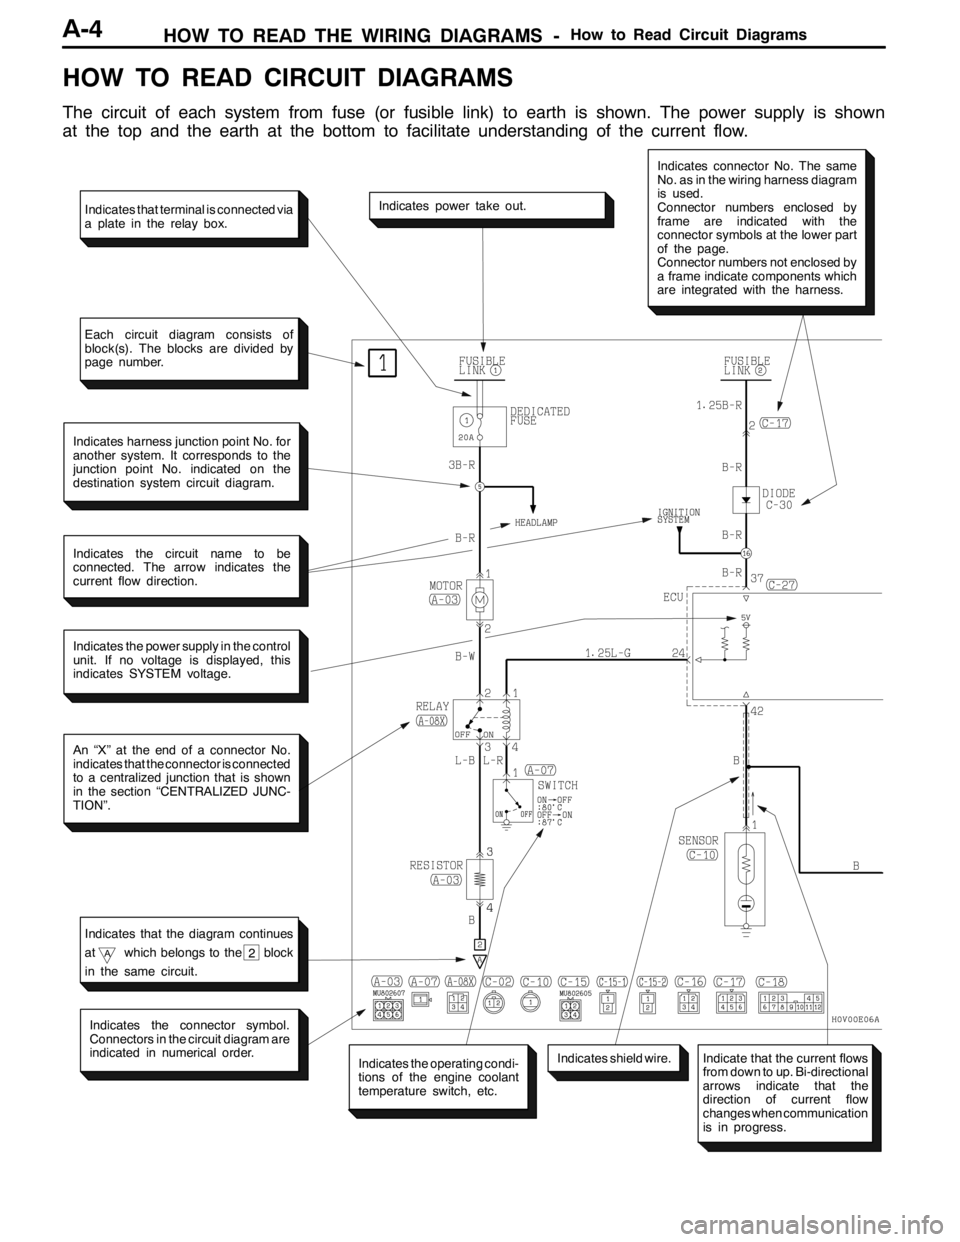 MITSUBISHI LANCER EVOLUTION 2007  Service Repair Manual HOW TO READ THE WIRING DIAGRAMS -How to Read Circuit DiagramsA-4
HOW TO READ CIRCUIT DIAGRAMS
The circuit of each system from fuse (or fusible link) to earth is shown. The power supply is shown
at the